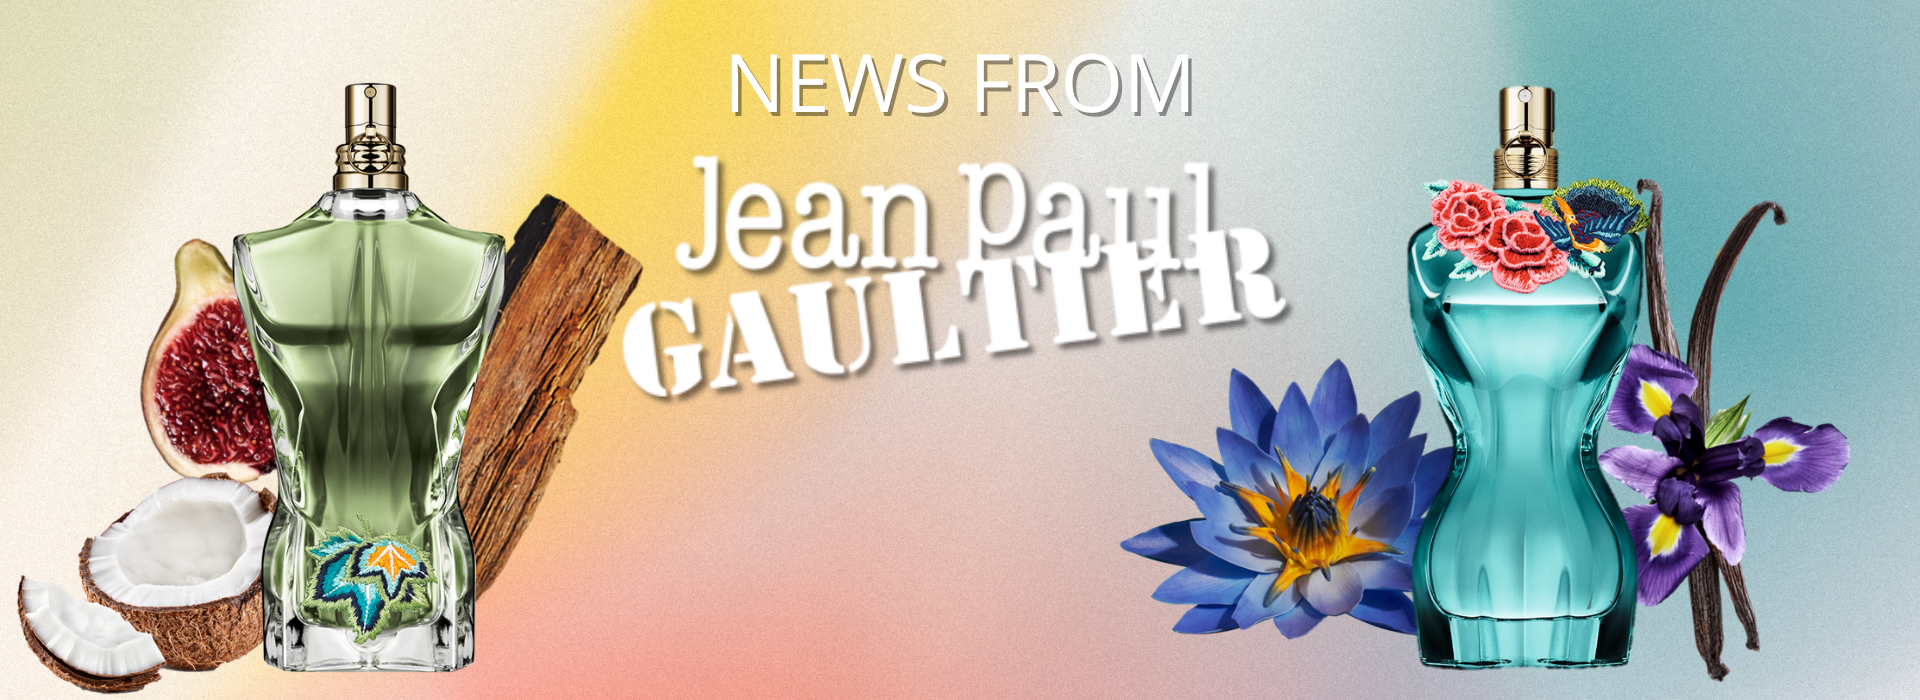 Discover news from Jean Paul Gaultier